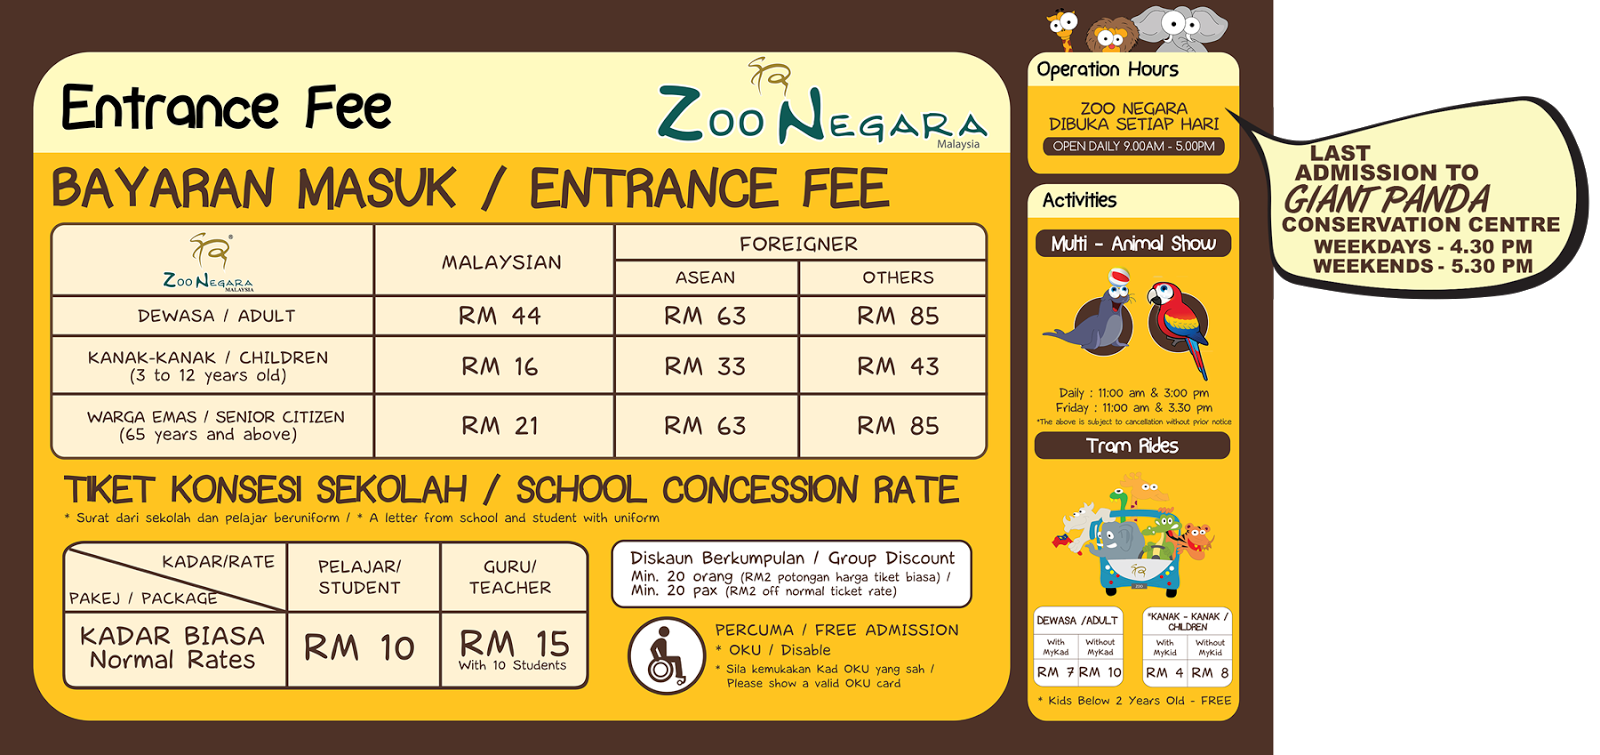 Zoo Negara Malaysia Entrance Ticket 31 Discount Promotion Malaysian Adult Rm29 Child Rm11 6 June 5 July 2016